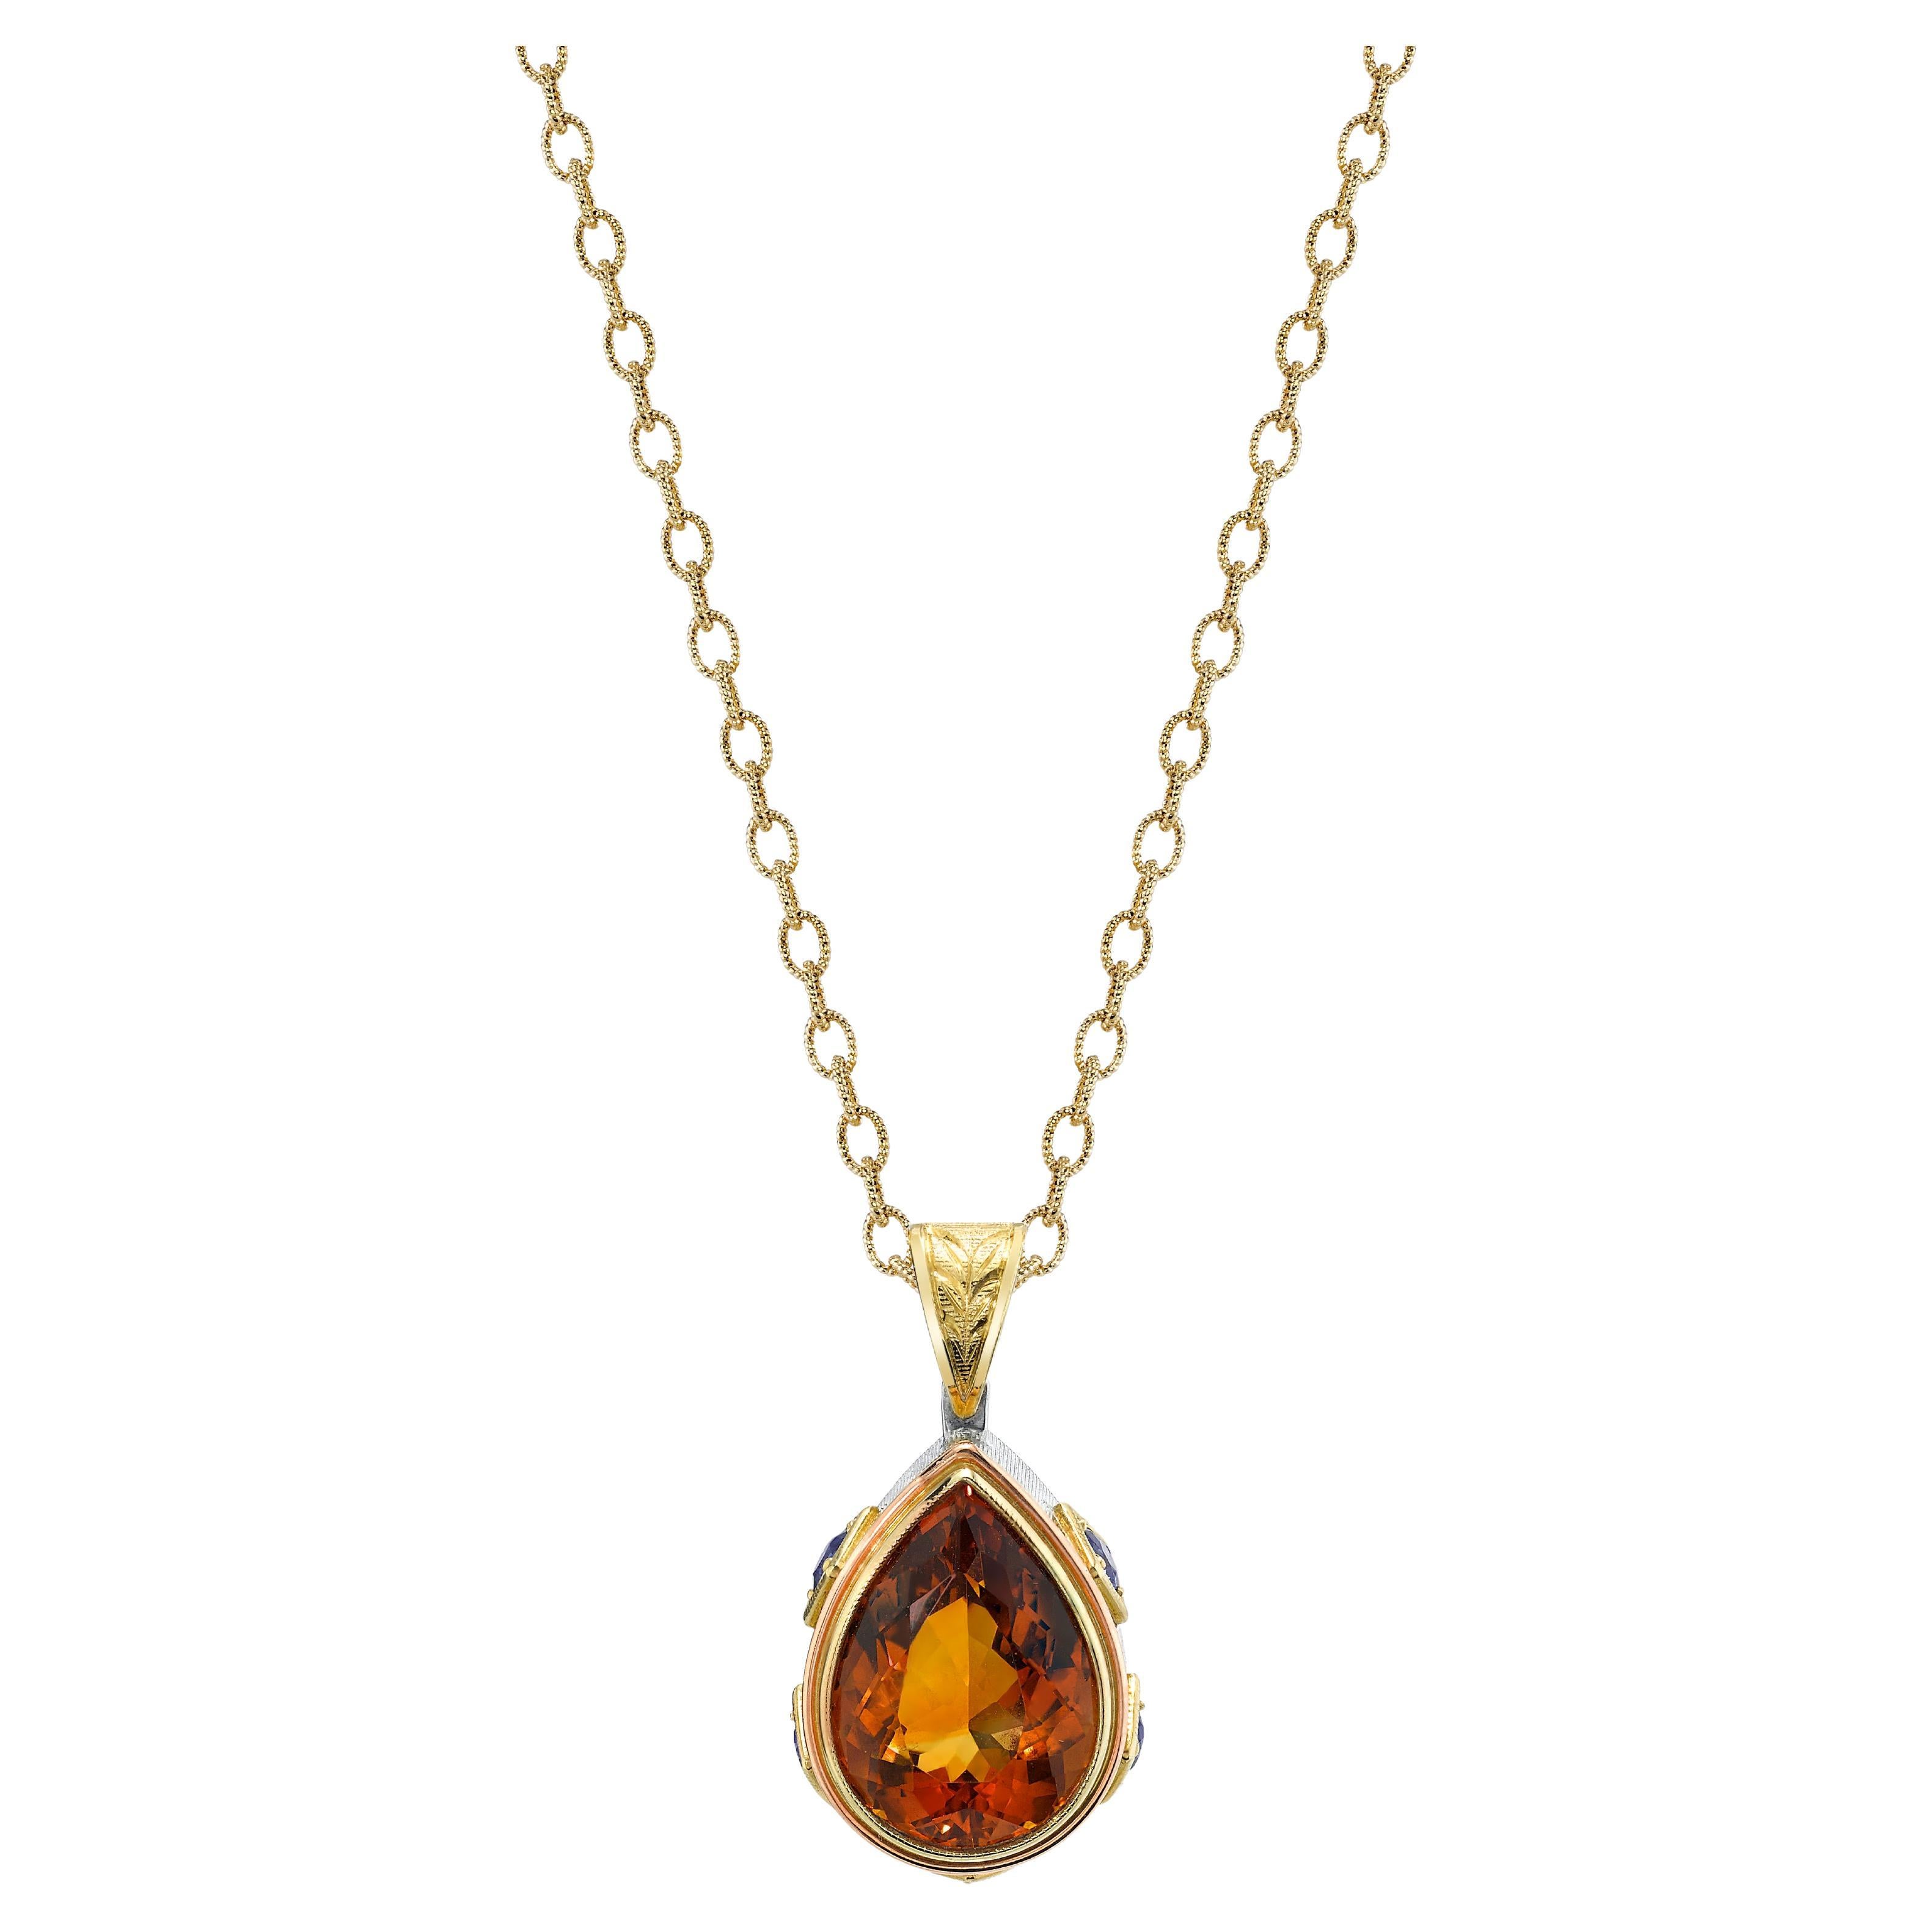 8.20 Carat Citrine Pear and Sapphire Pendant Necklace in 18k Yellow Gold